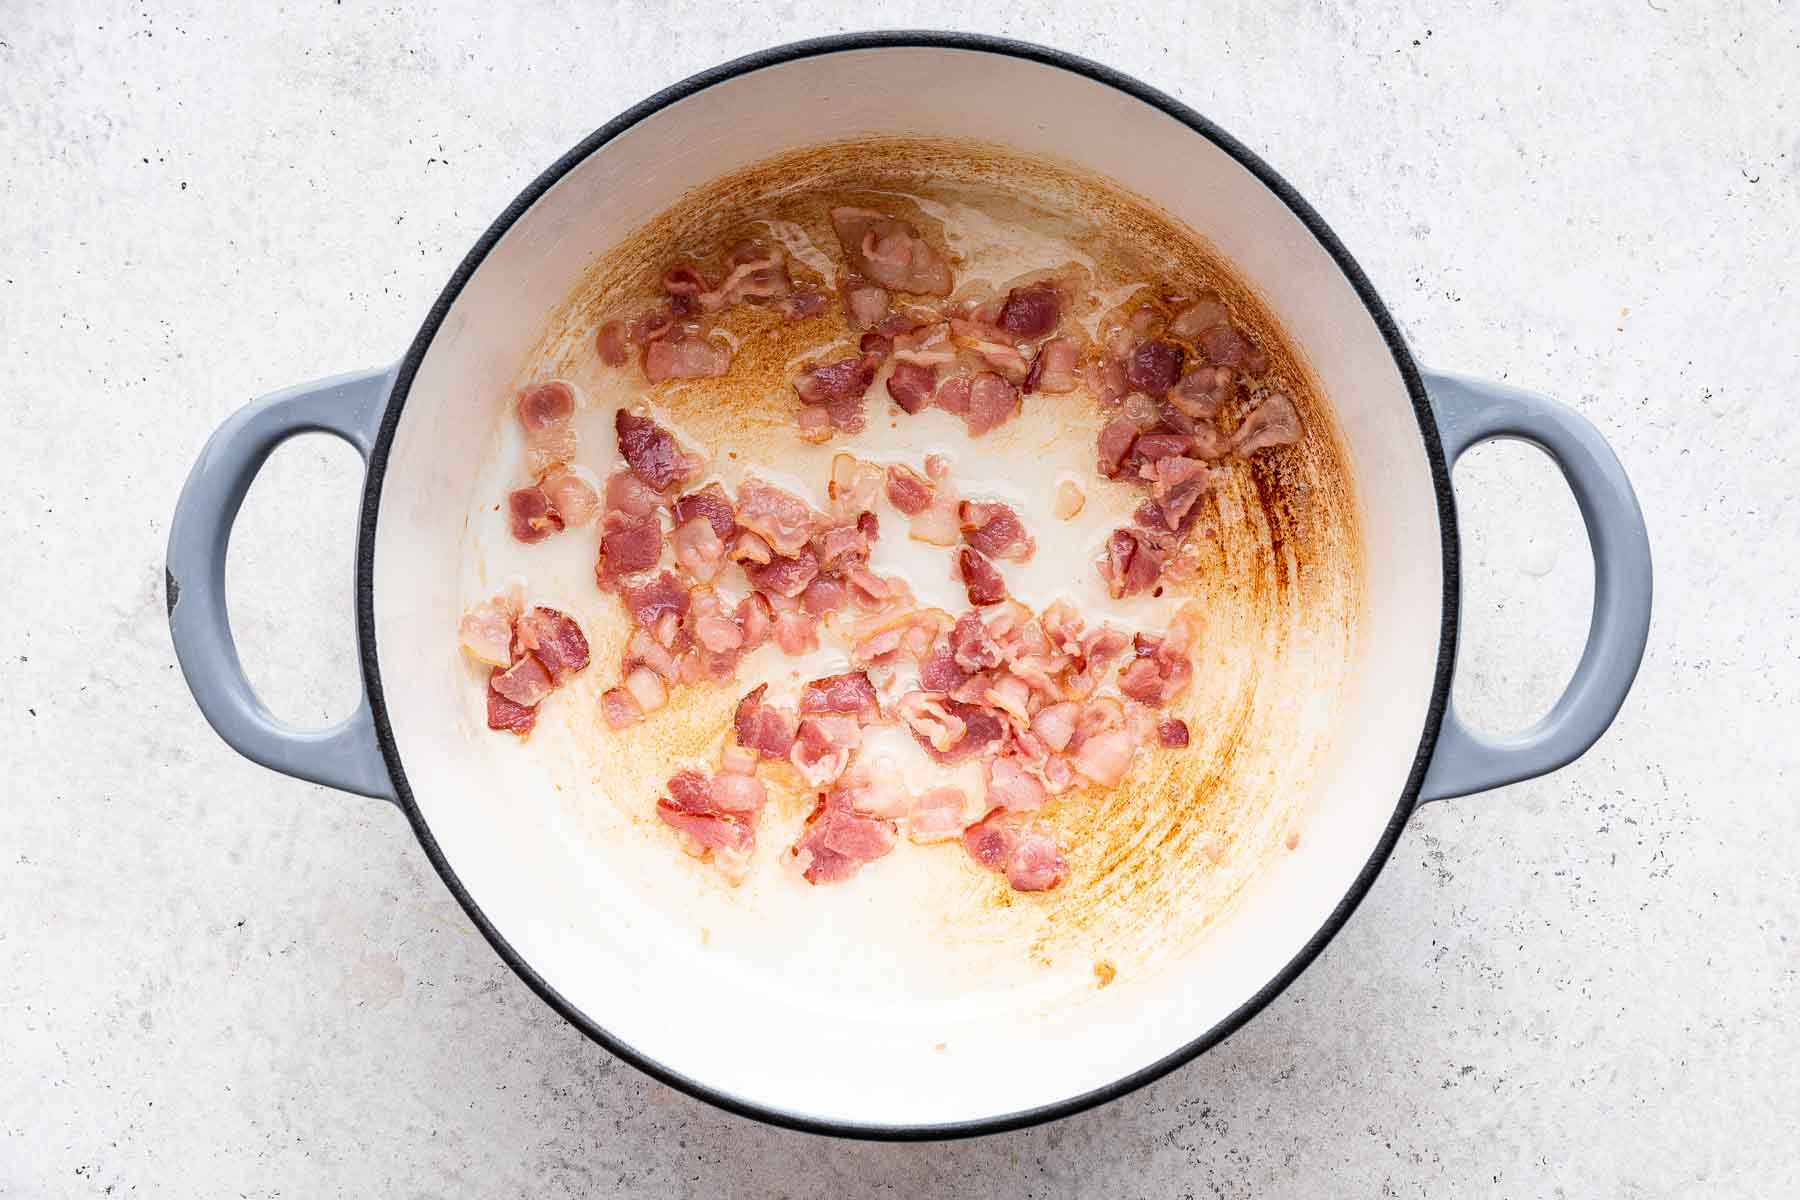 Chopped bacon cooking in white pan.